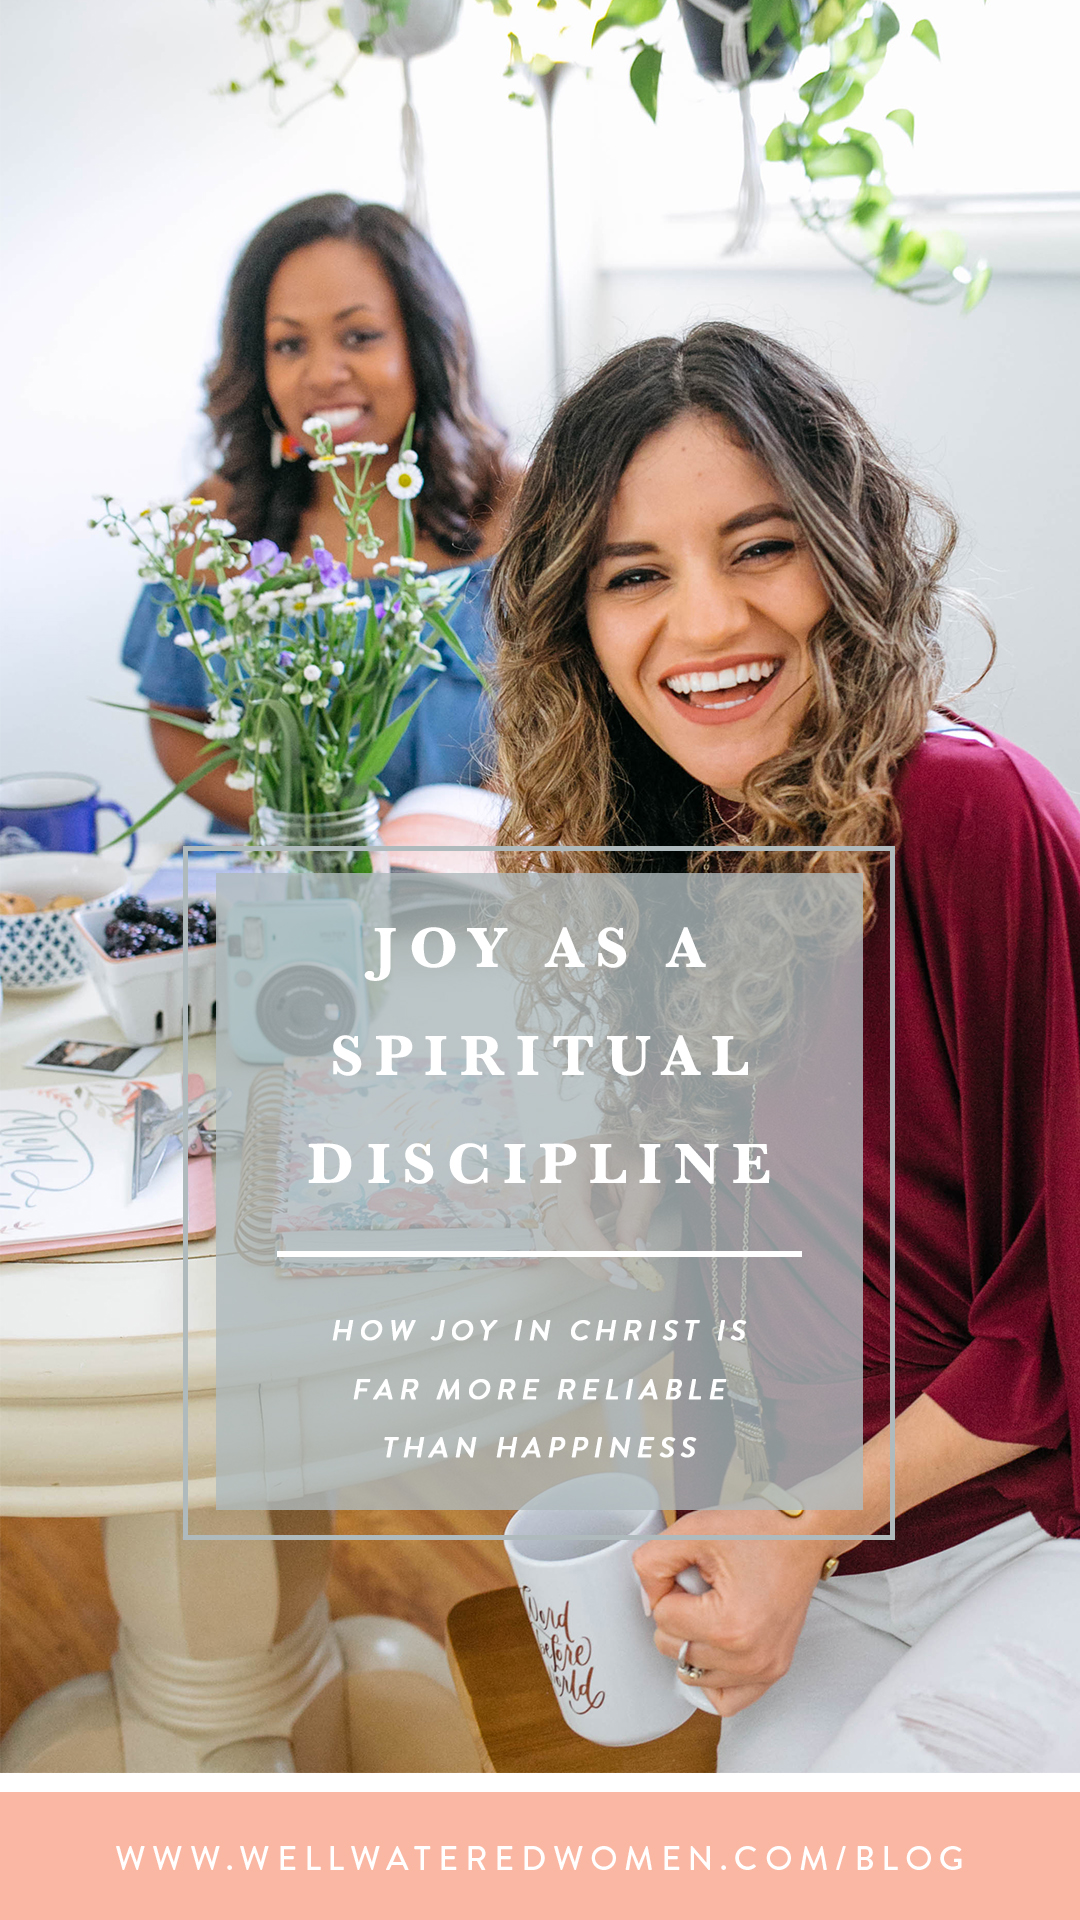 Joy as a Spiritual Discipline: How Joy in Christ is Far More Reliable than Happiness